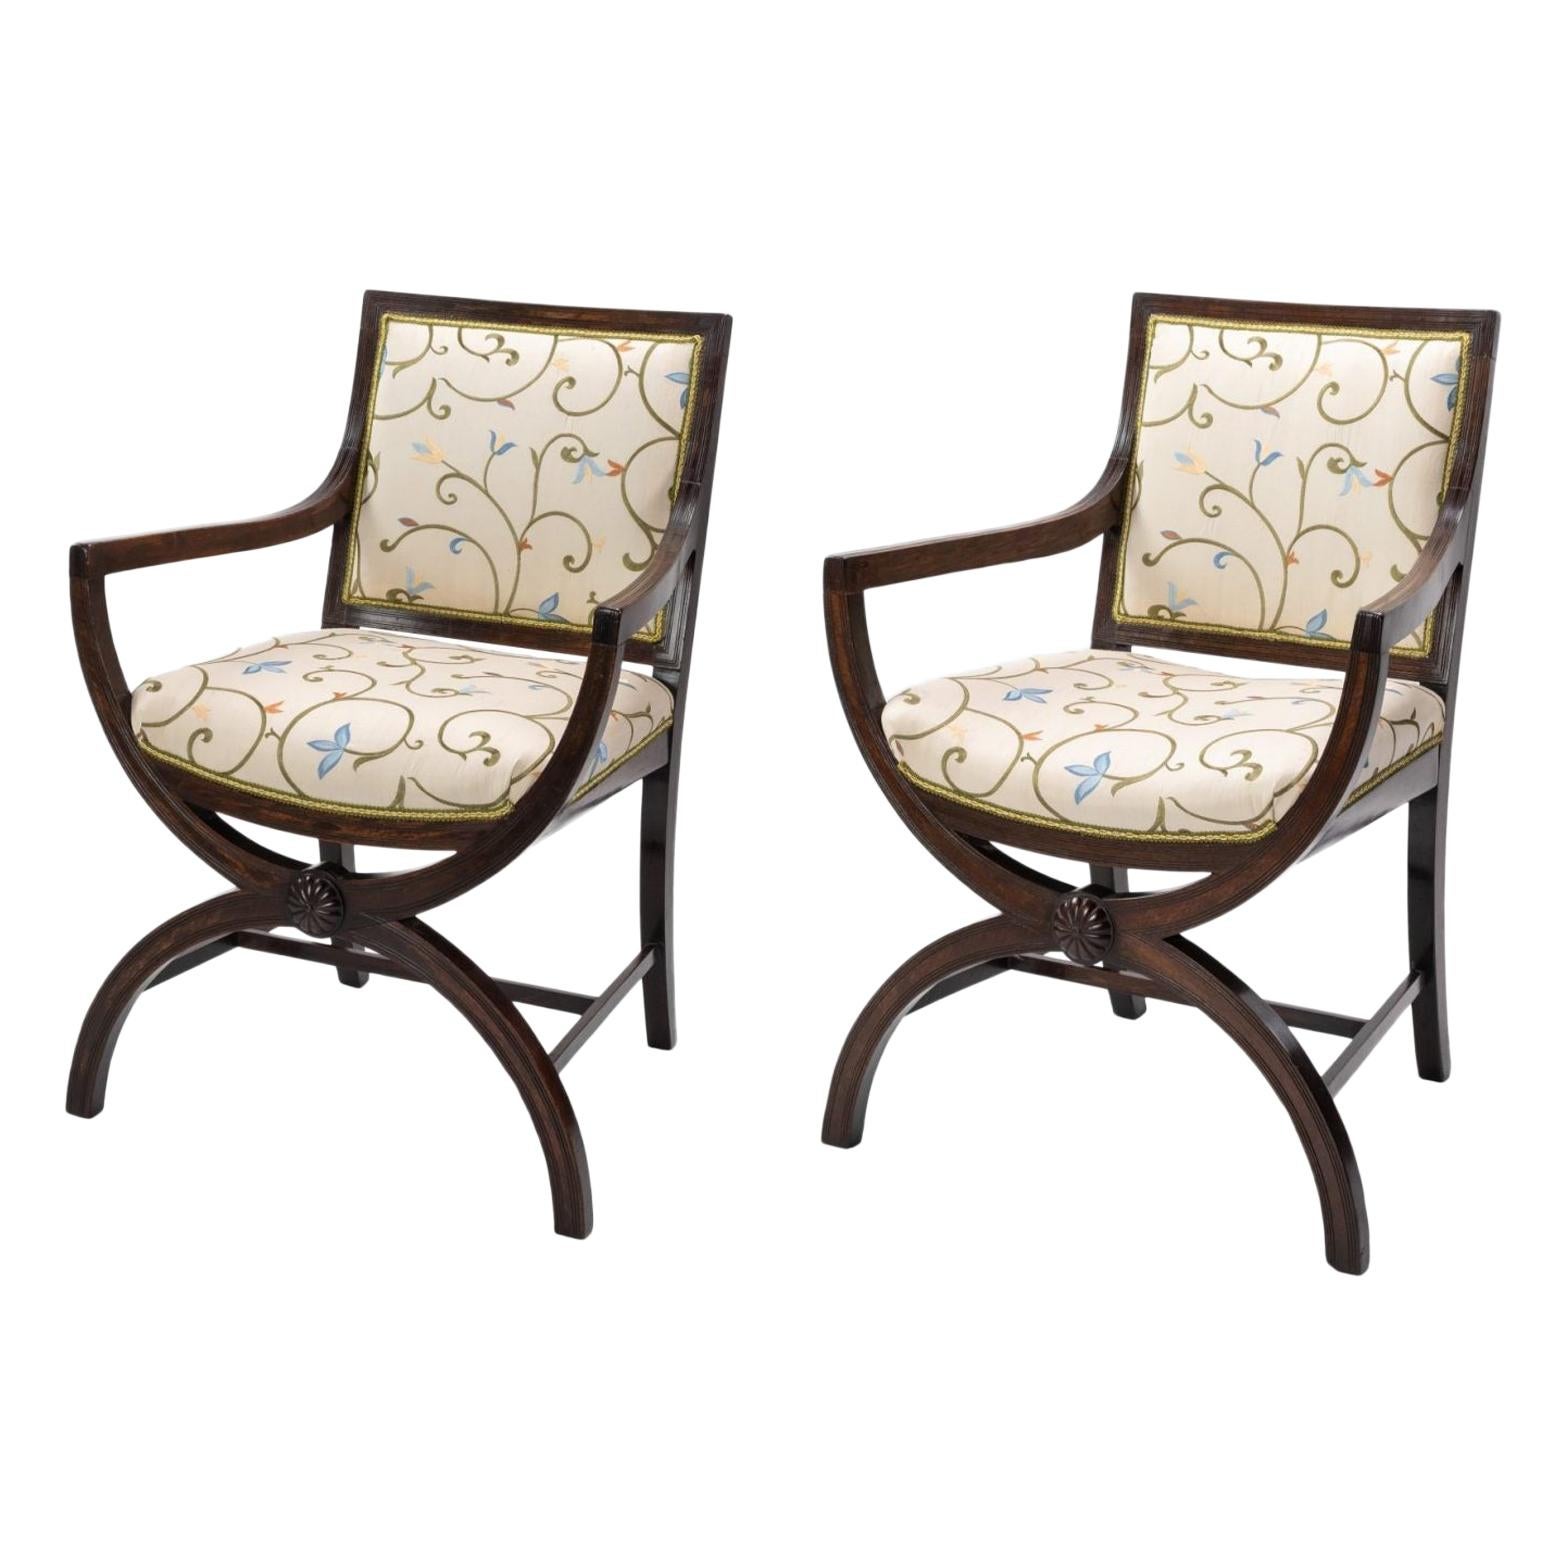 Pair of 19th Century Curule Armchairs in the Manner of Thomas Hope